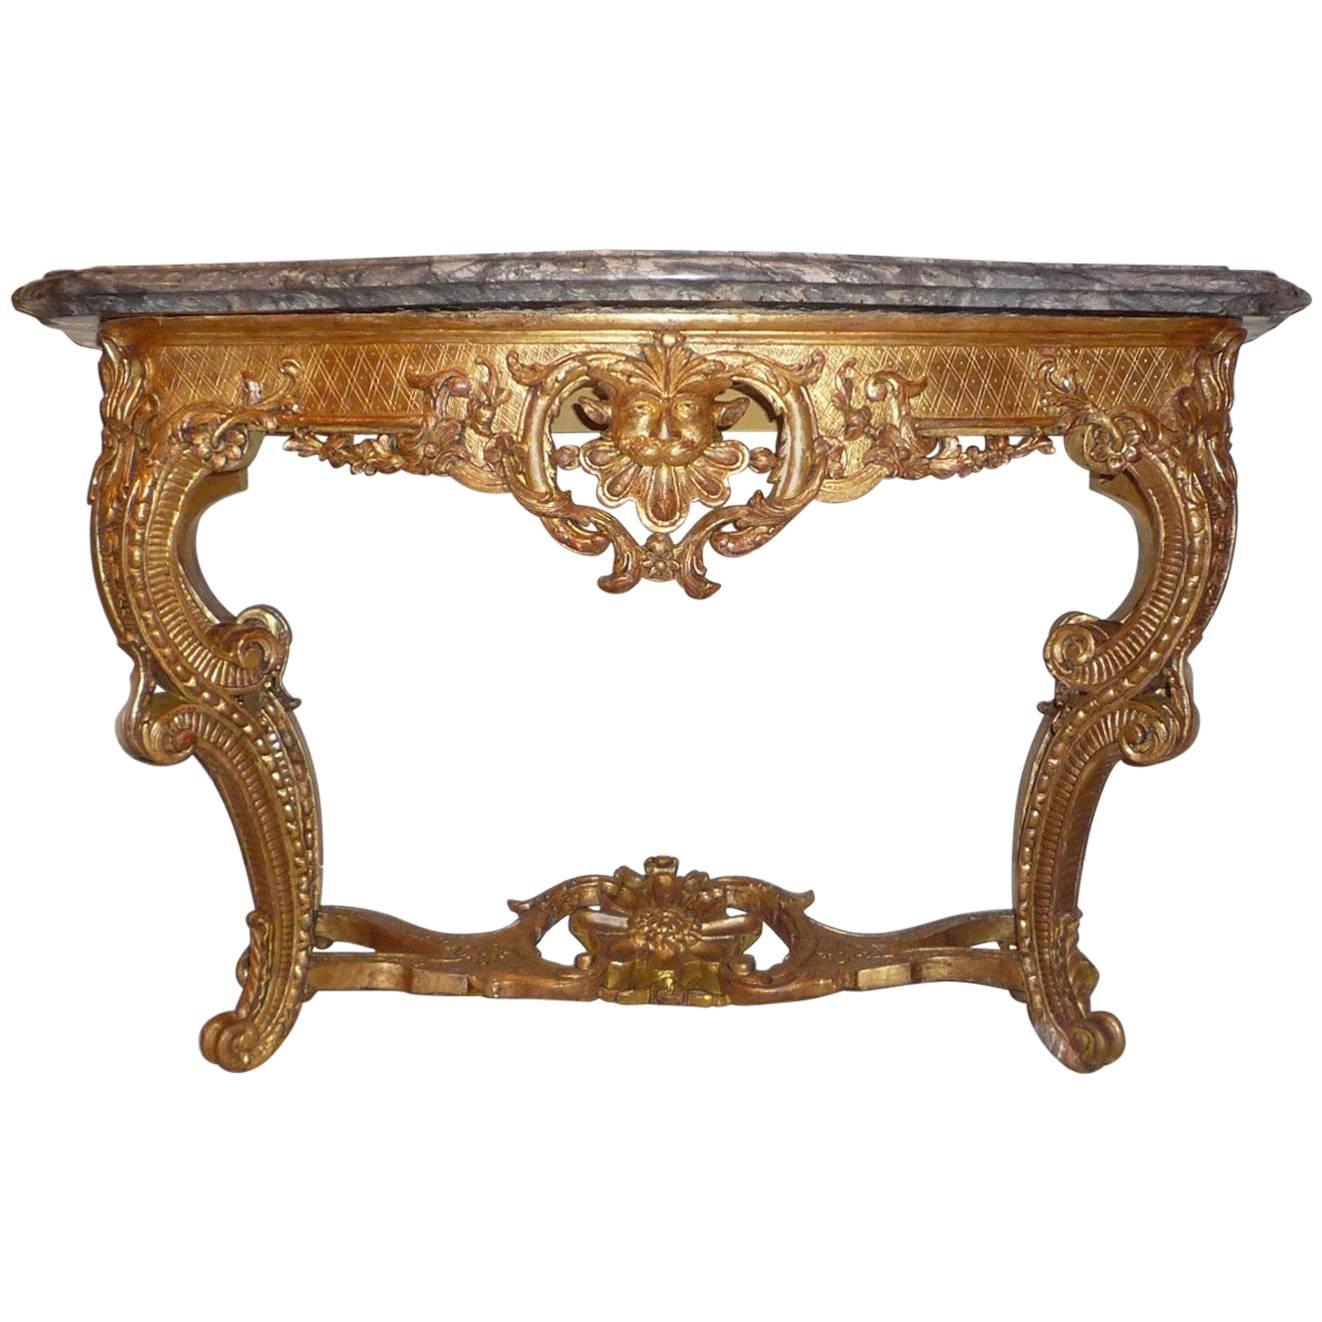 French Regence Period Giltwood Console Table with Marble Top, circa 1730